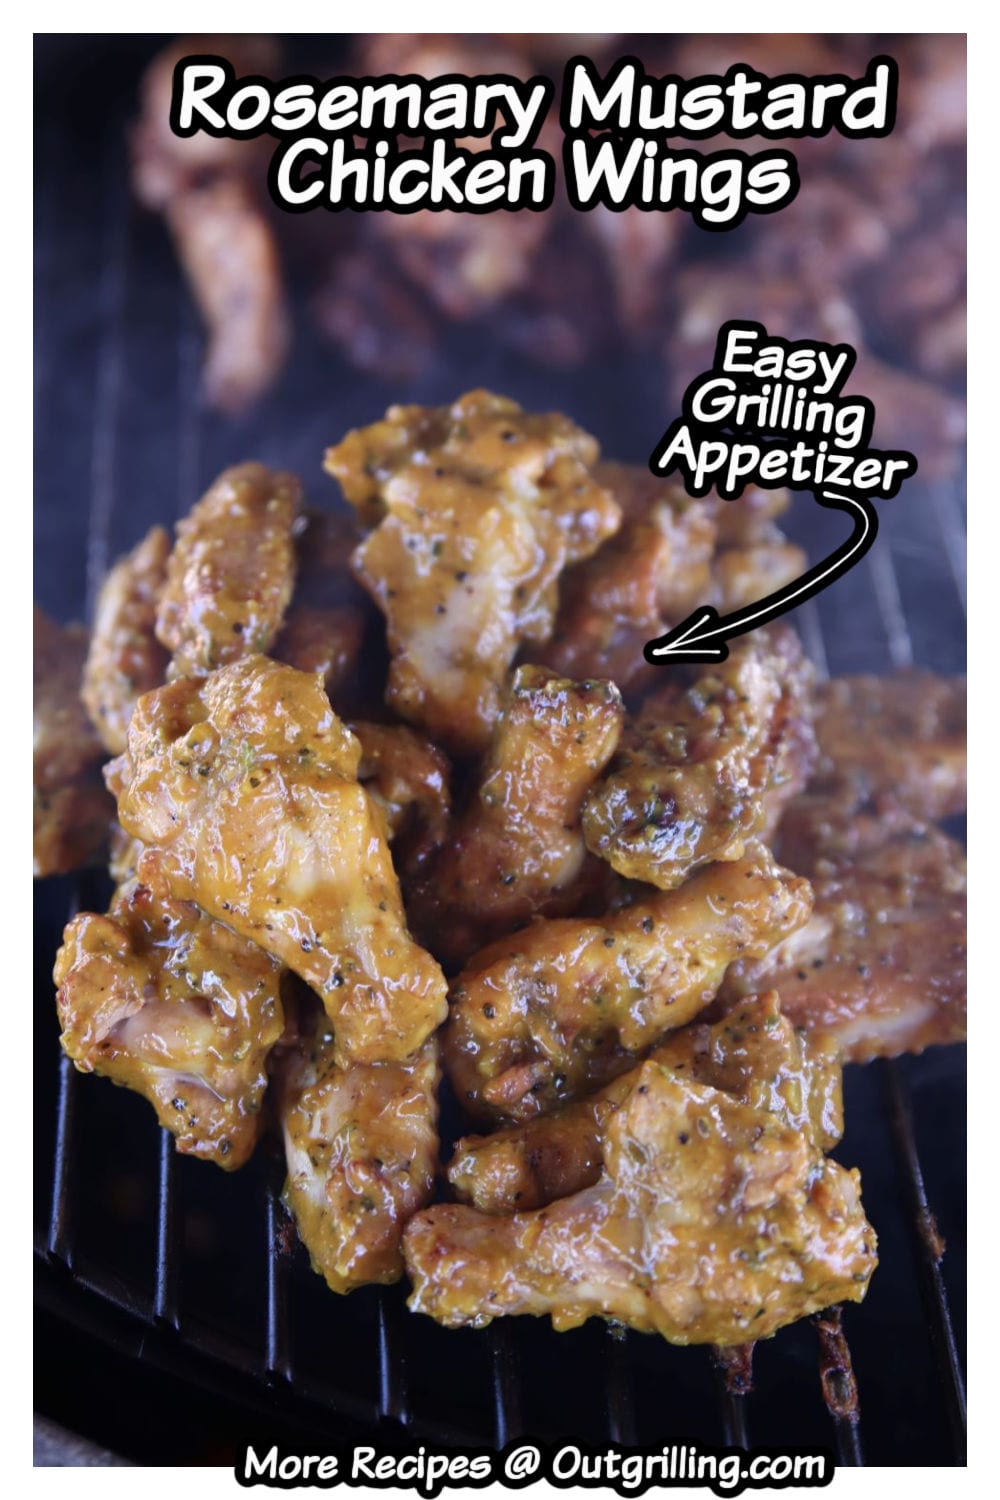 Rosemary Mustard Chicken Wings on grill with text overlay